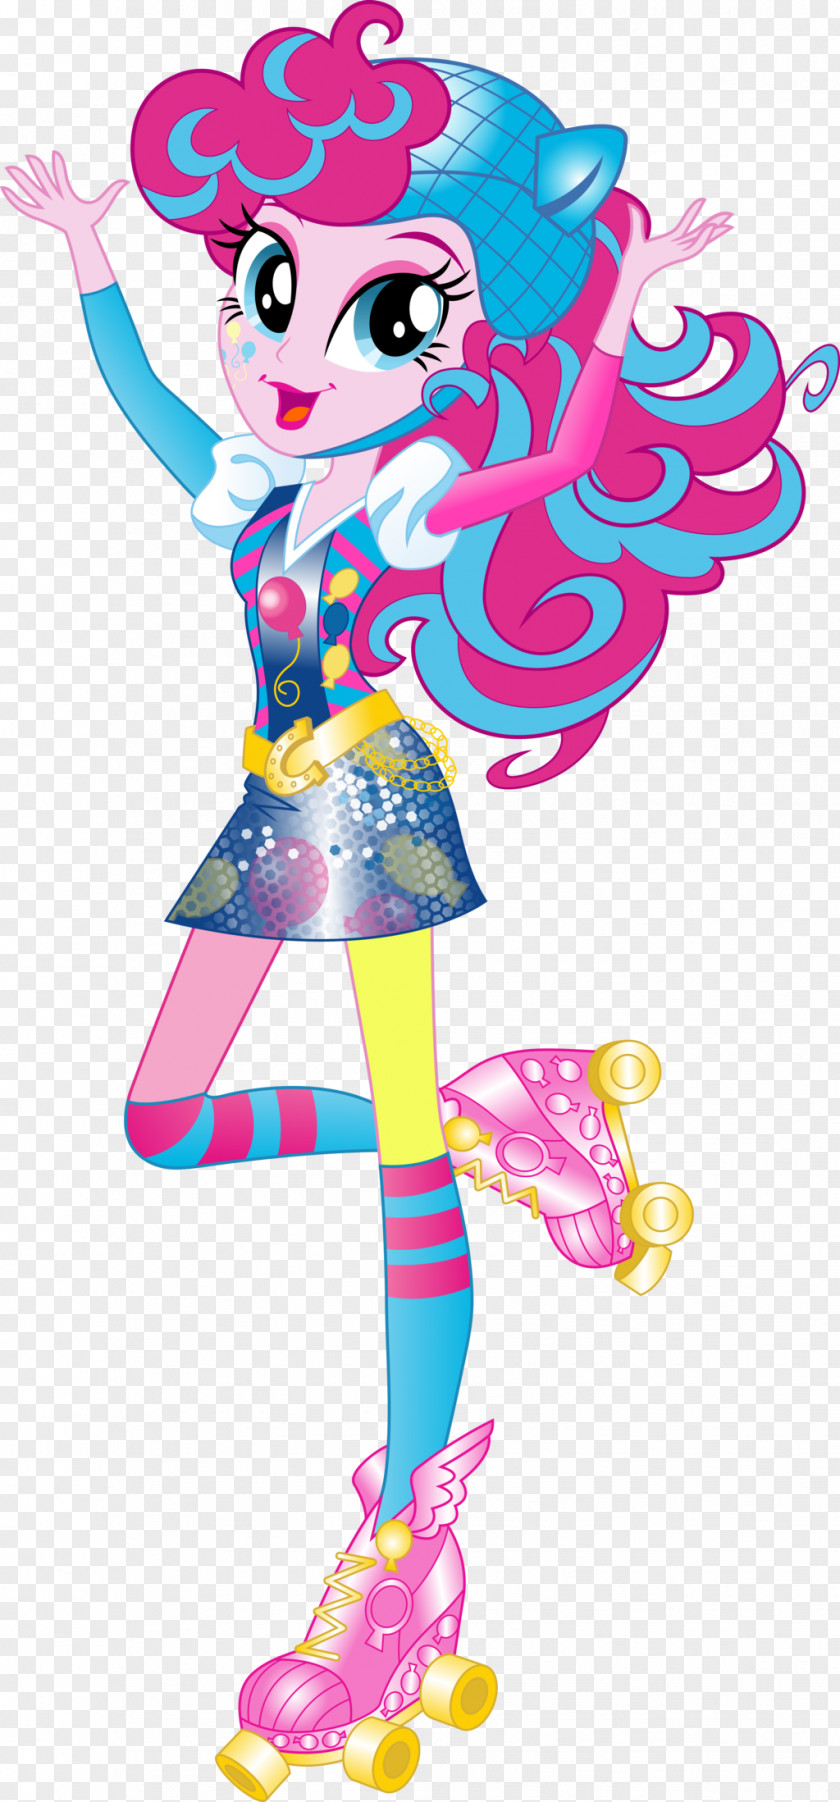 Equestria Girls Fluttershy Doll Box Back Pinkie Pie Rarity My Little Pony: Image Illustration PNG